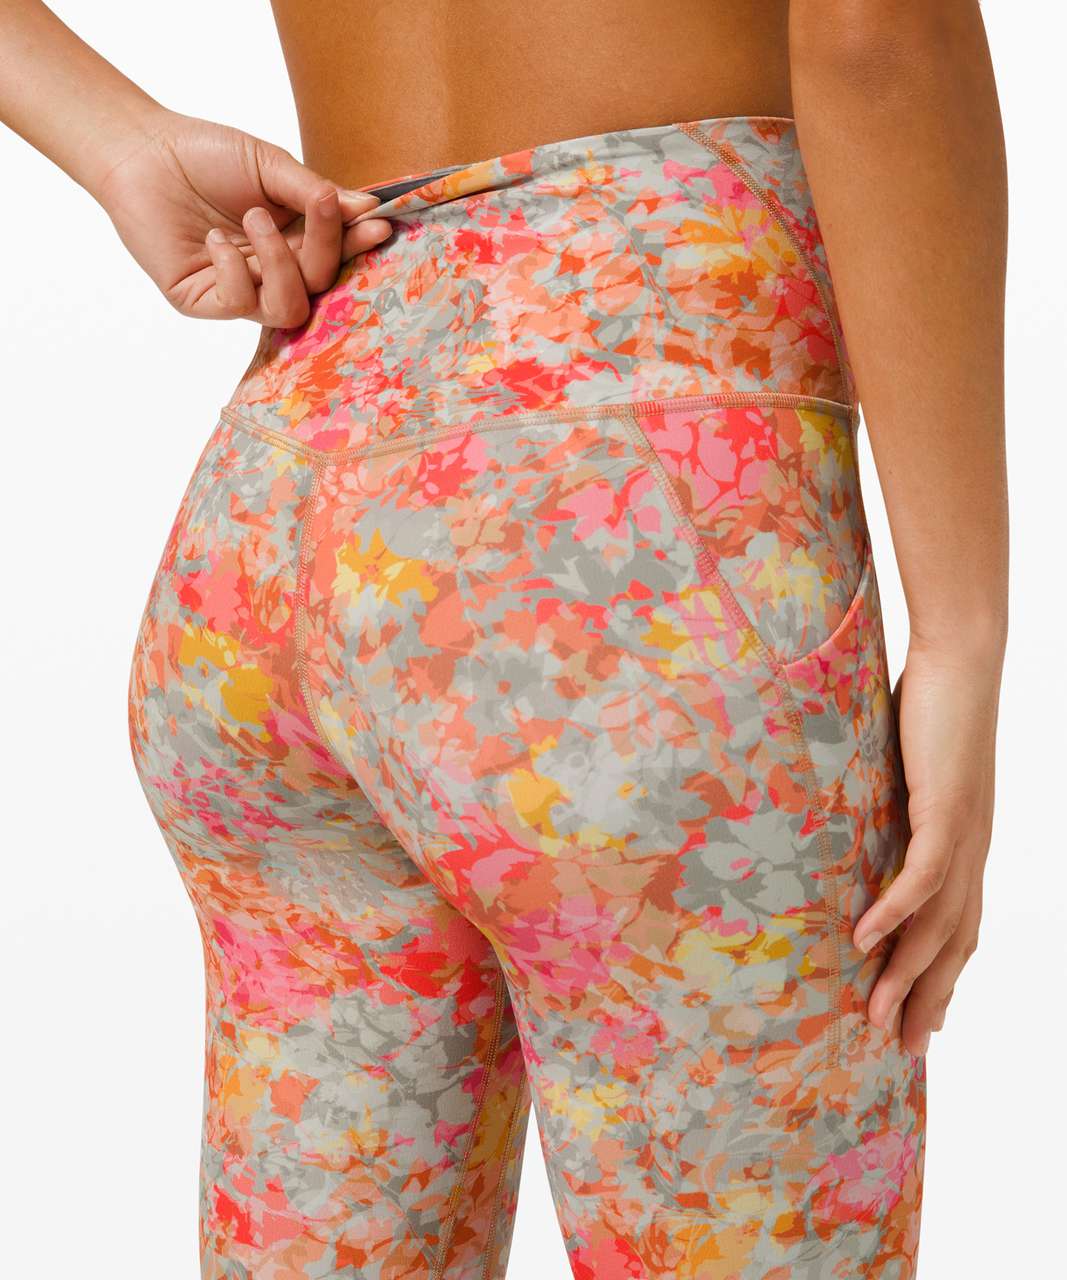 Lululemon Align High Rise Pant with Pockets 25" - Inflorescence Multi